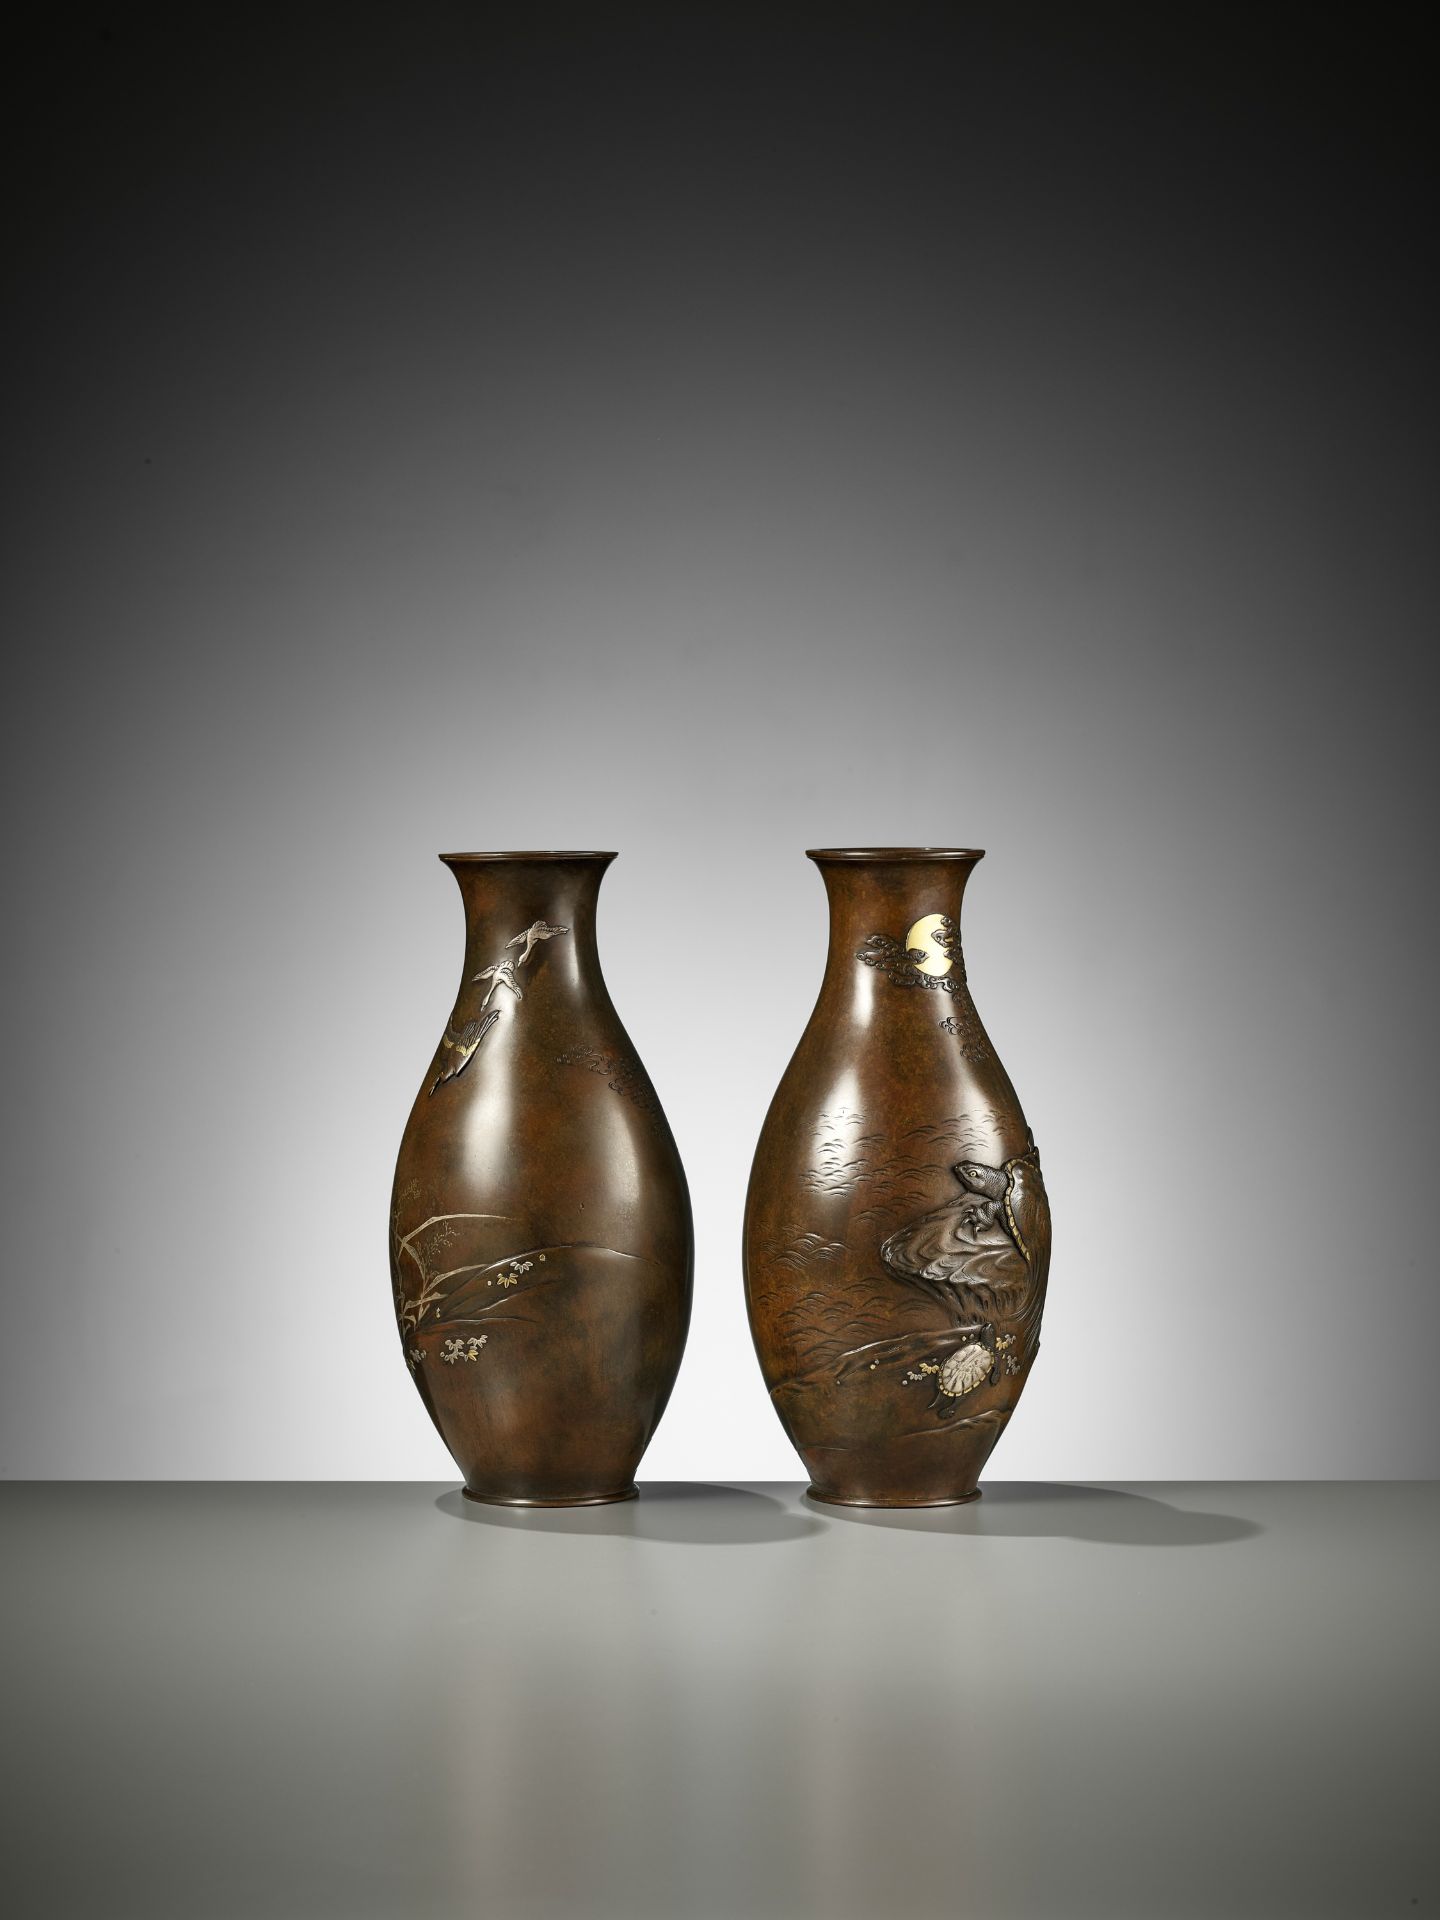 CHOMIN: A SUPERB PAIR OF INLAID BRONZE VASES WITH MINOGAME AND GEESE - Image 9 of 11